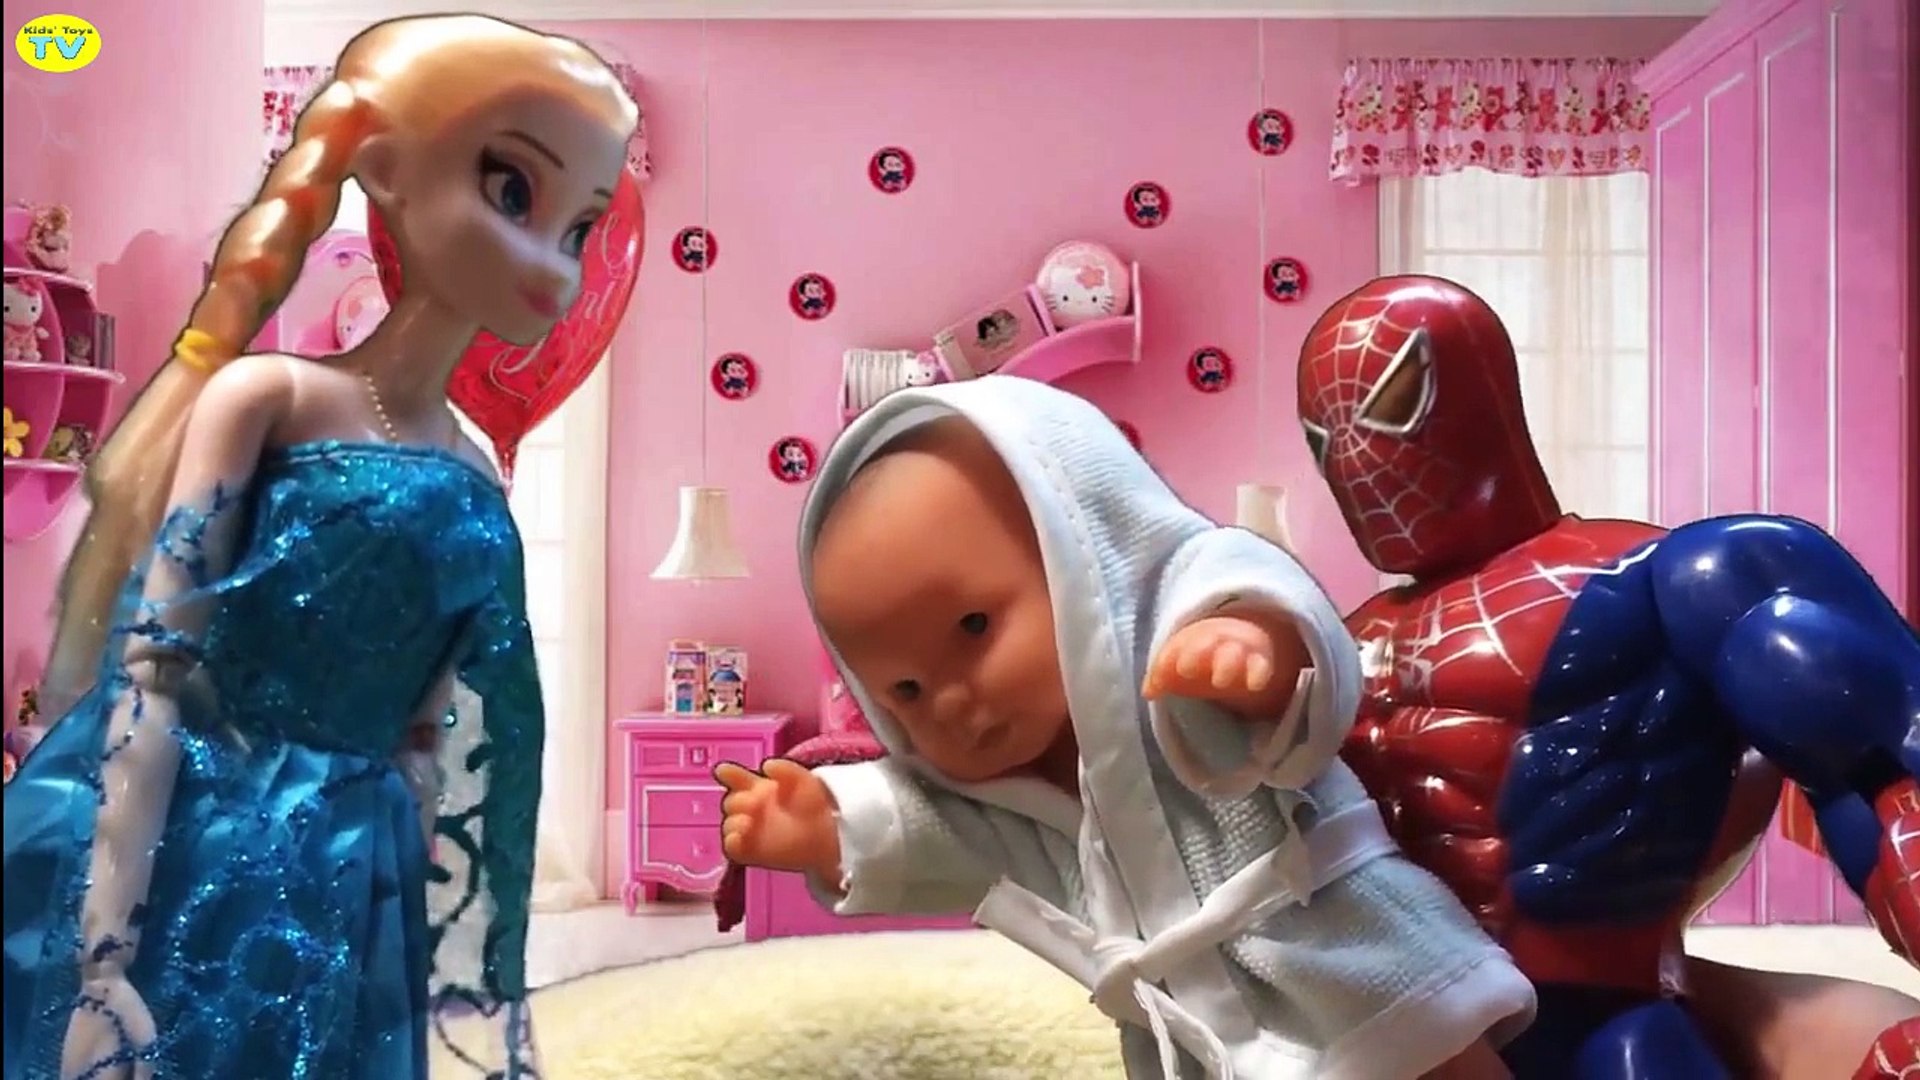 Princess Frozen Elsa and barbie PREGNANT - giving birth in hospital - Fun  superheroes compilation - video Dailymotion